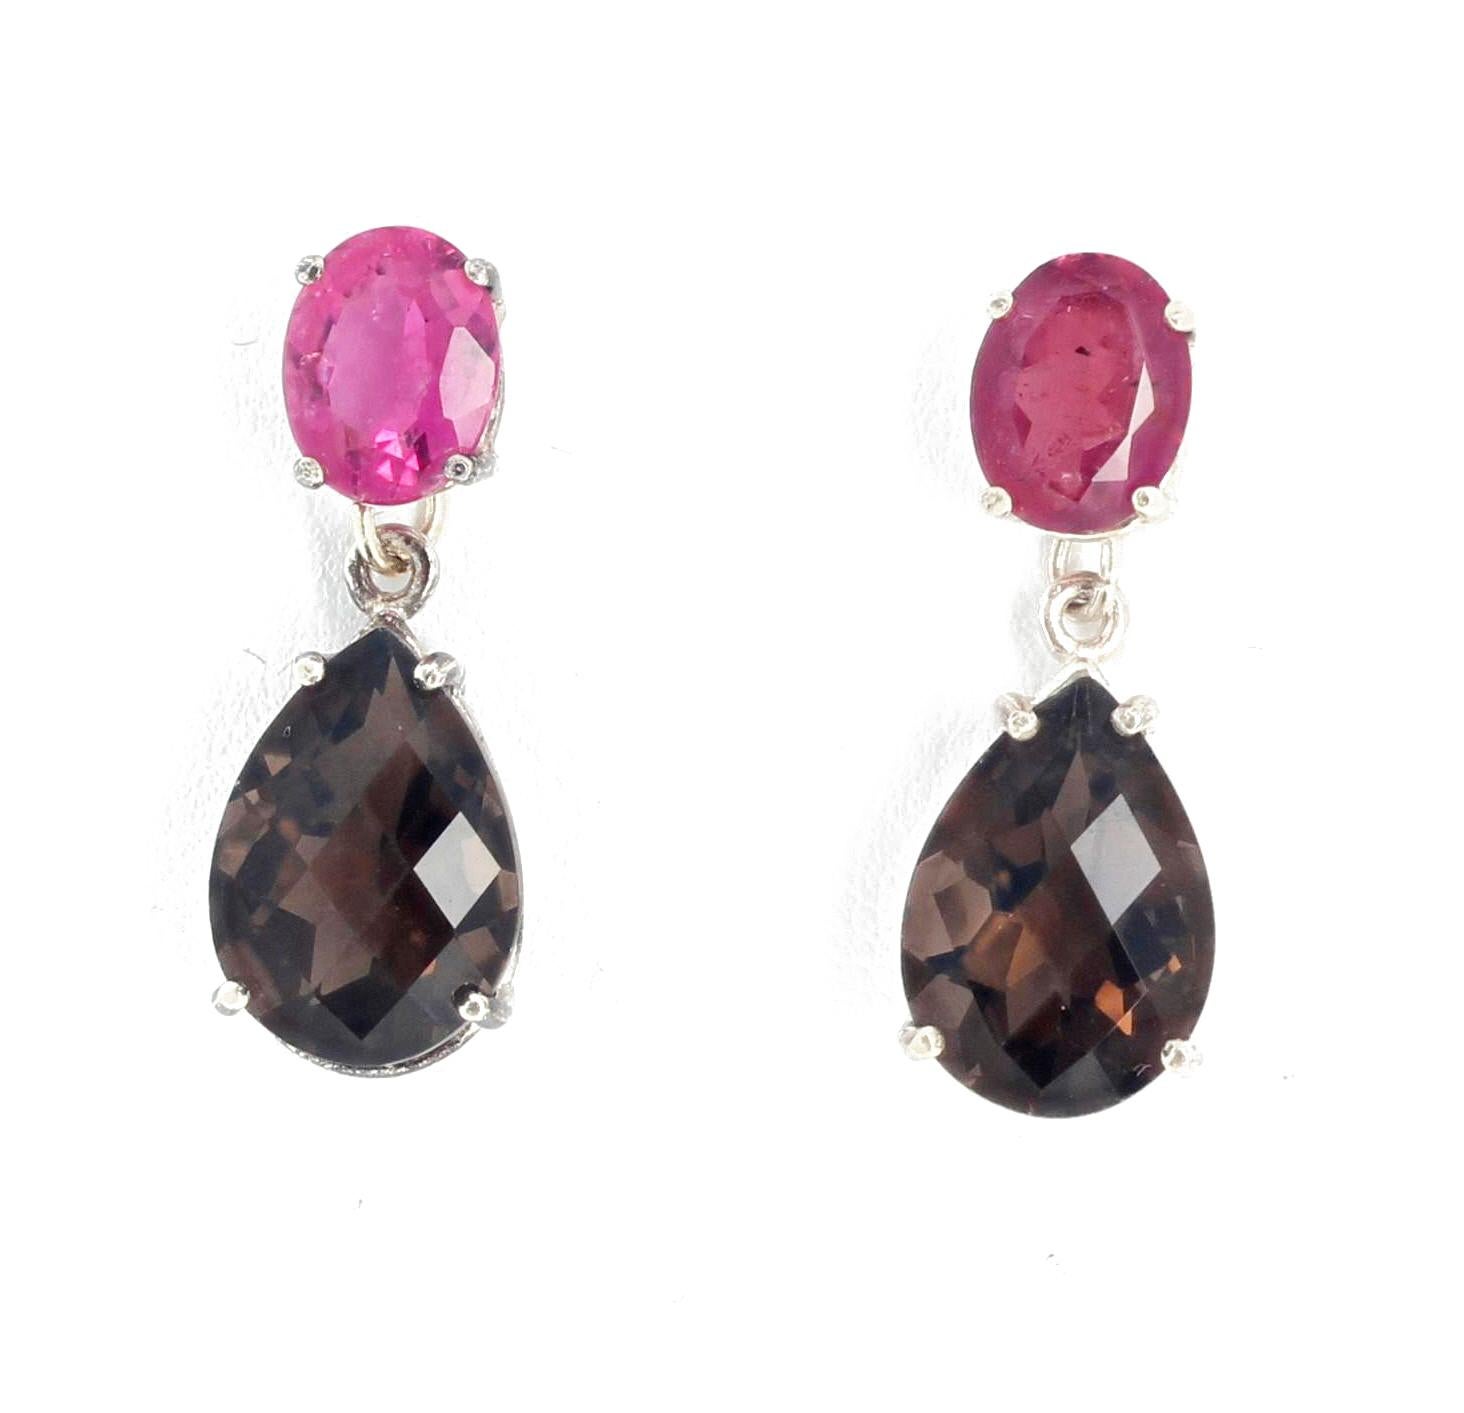 Brilliant matching pink natural (8mm x 6mm) Tourmalines (0.96 carats each) elegantly dangle glittering checkerboard gem cut pear shaped  natural Smoky Quartz ( 7 carats each - 18 mm x 14 mm) on these sterling silver stud earrings.  They dangle 1 1/8